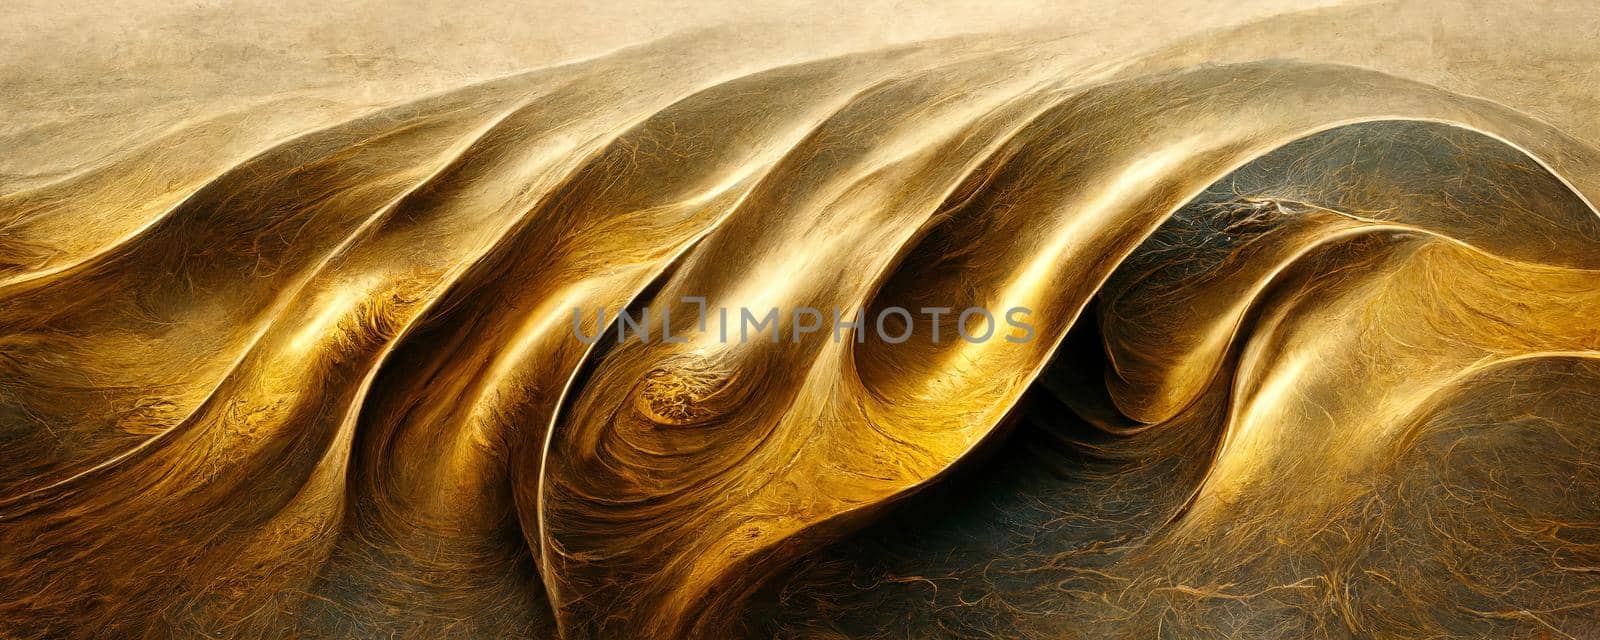 abstract pattern of golden lines resembling crumpled fabric or waves by TRMK